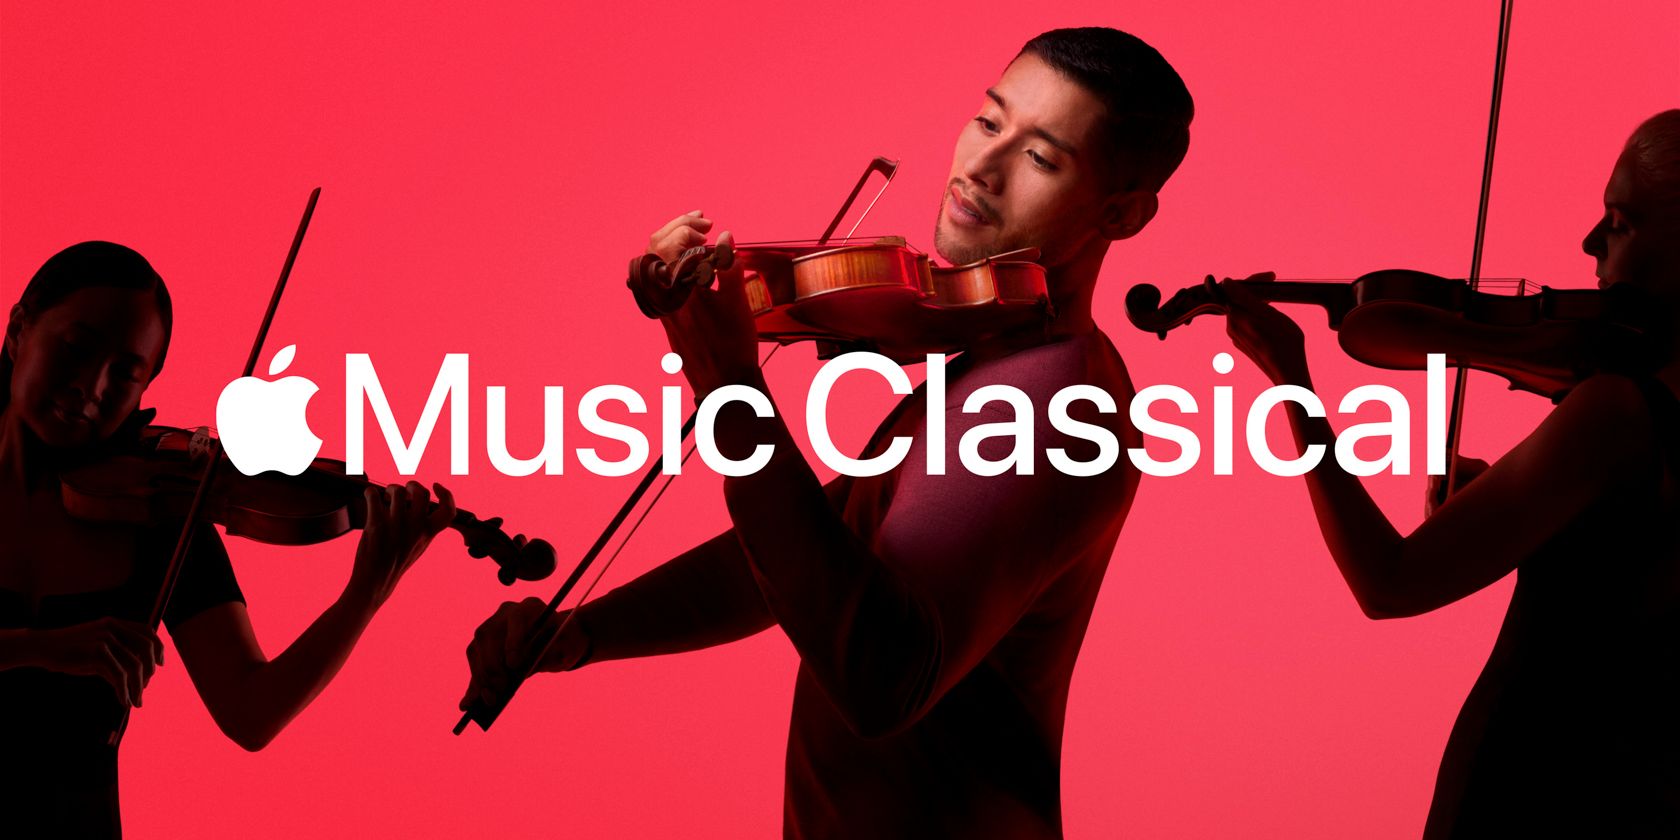 Apple Music Classical image showing a violinist playing against a red background